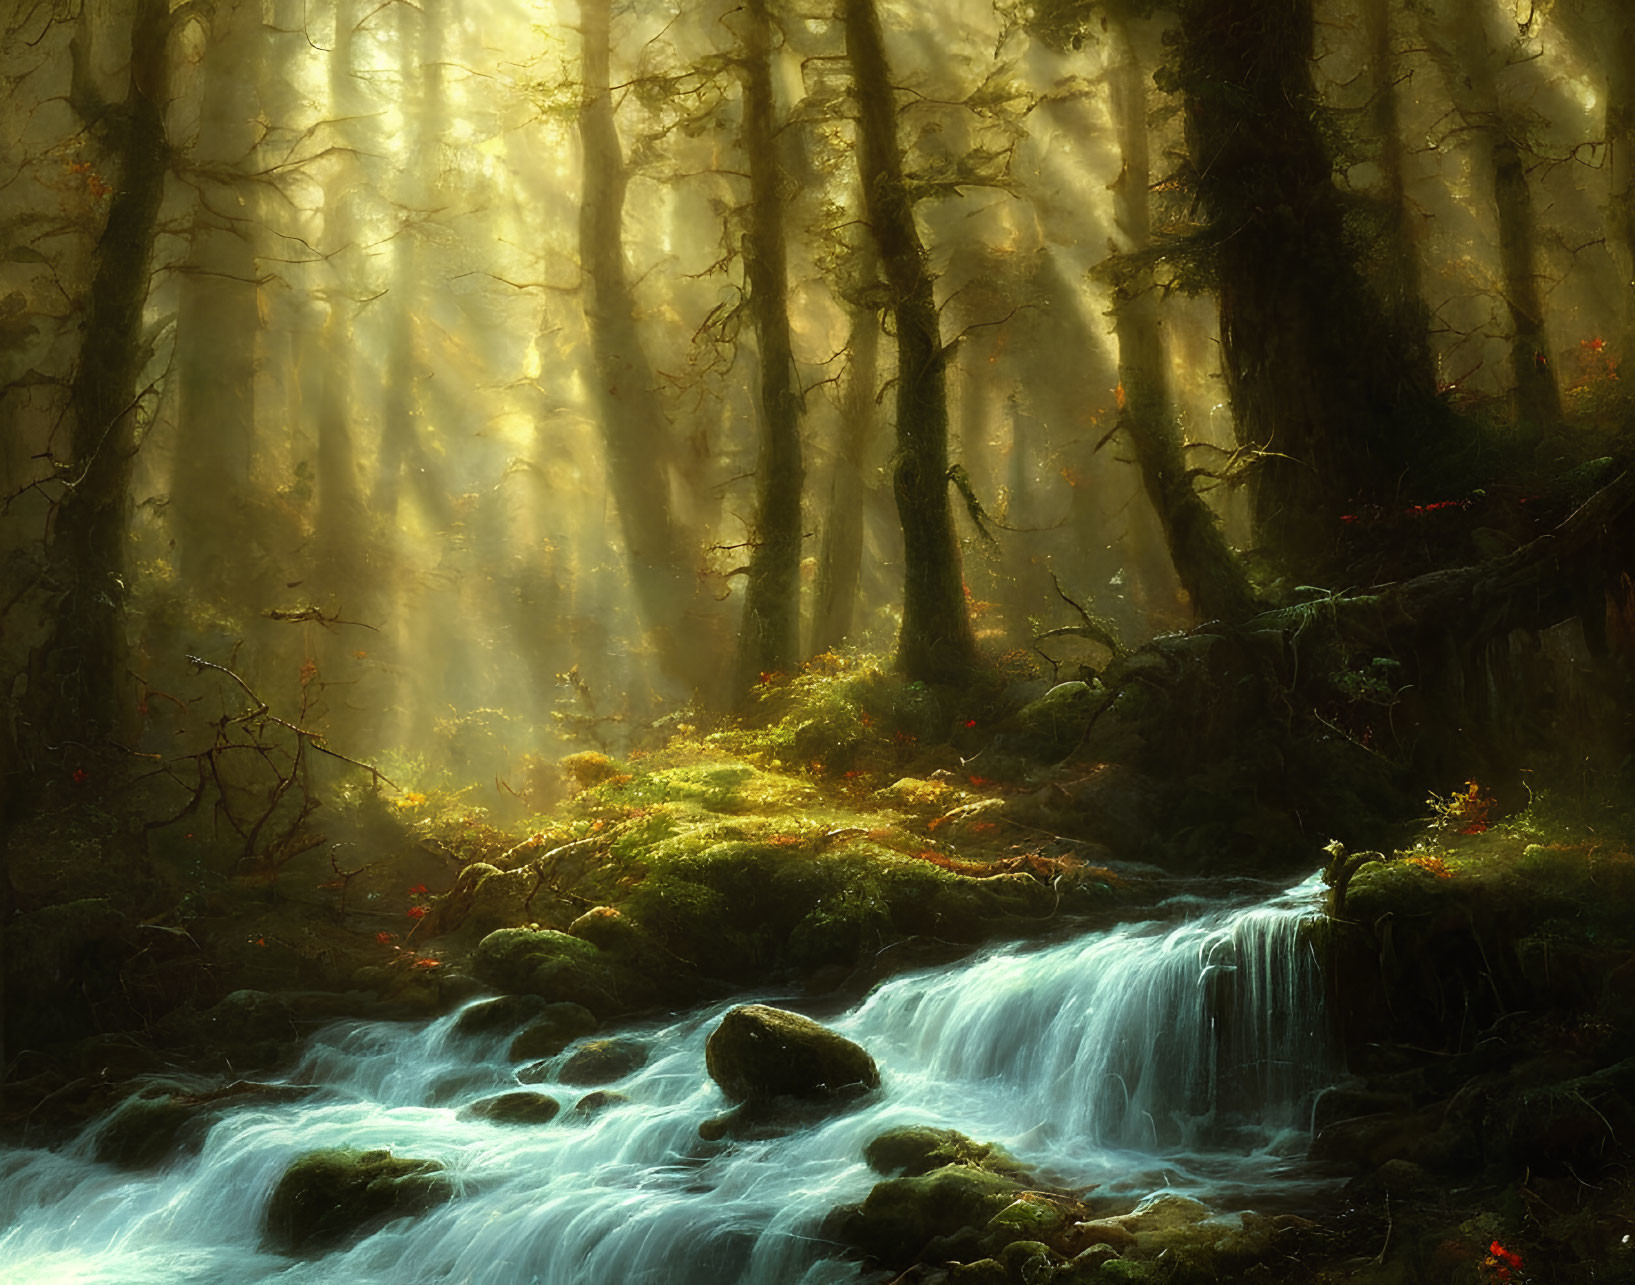 Tranquil forest landscape with waterfall, moss-covered rocks, and sunlight.